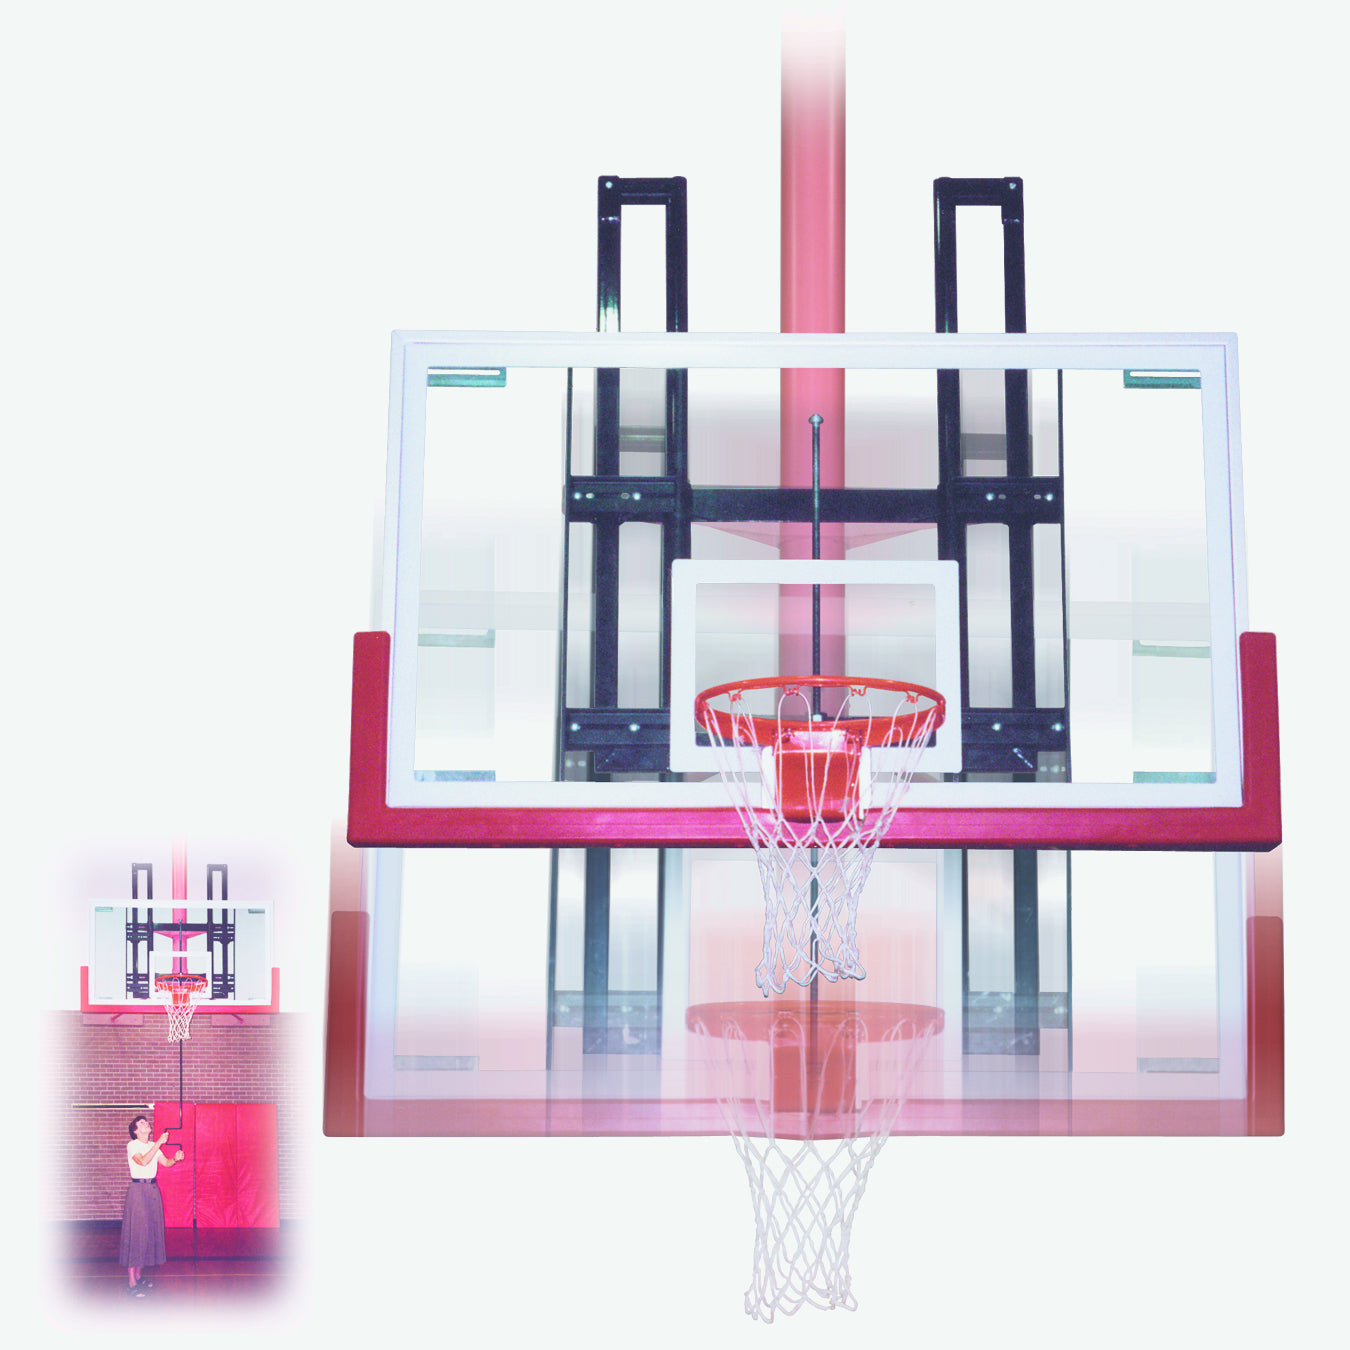 First Team FoldaMount46 Victory Wall Mounted Basketball Goal - 42"x72" Tempered Glass